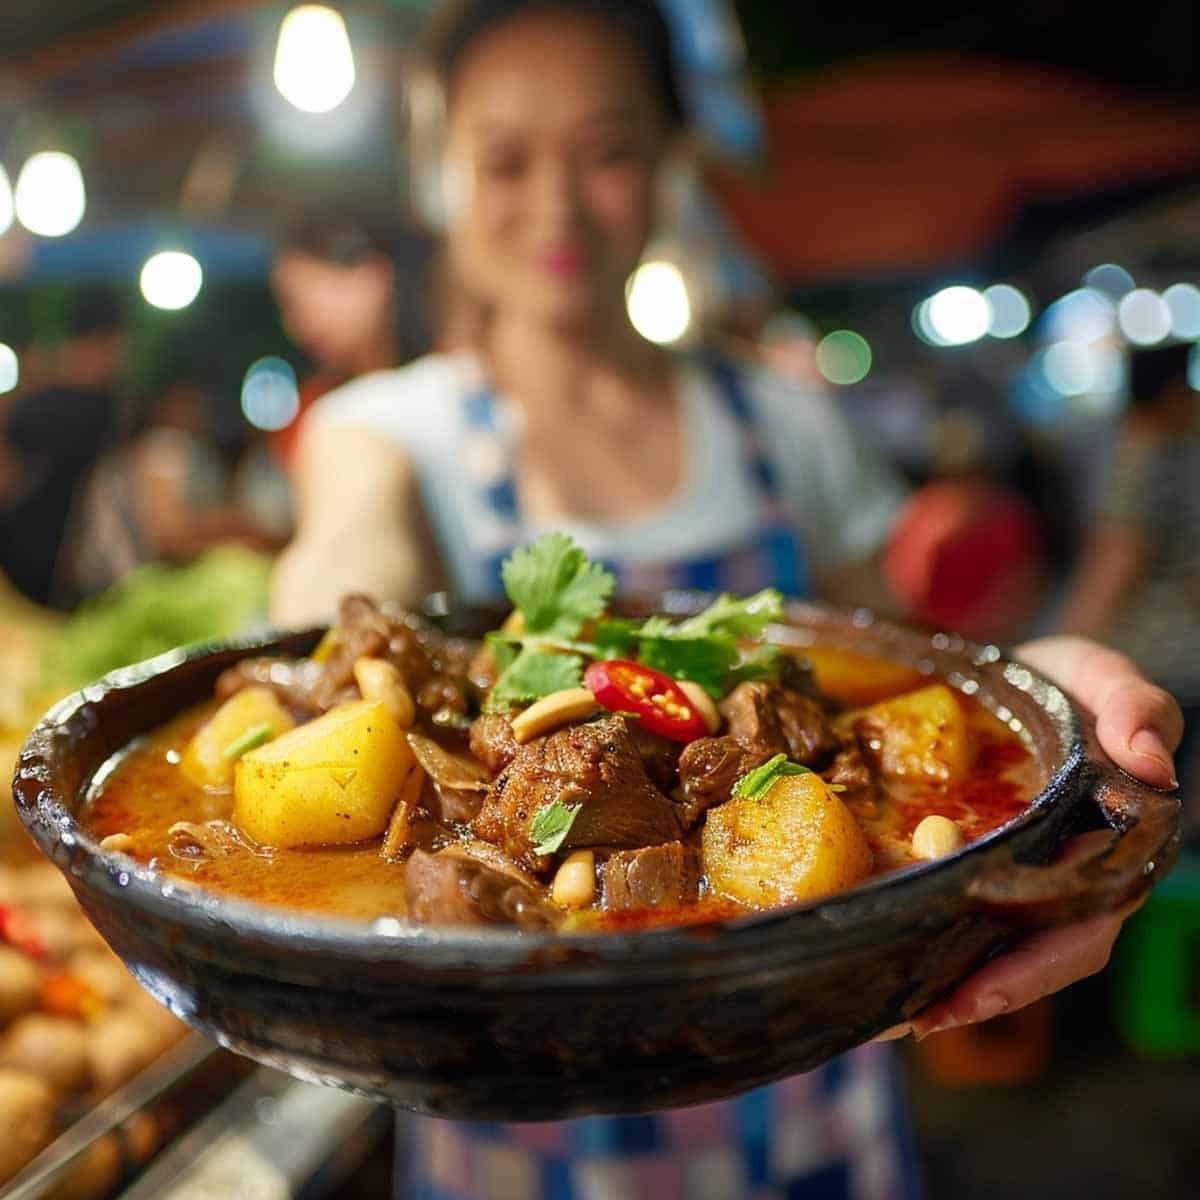 Beef Massaman Curry being served at a night market stall under ambient lighting